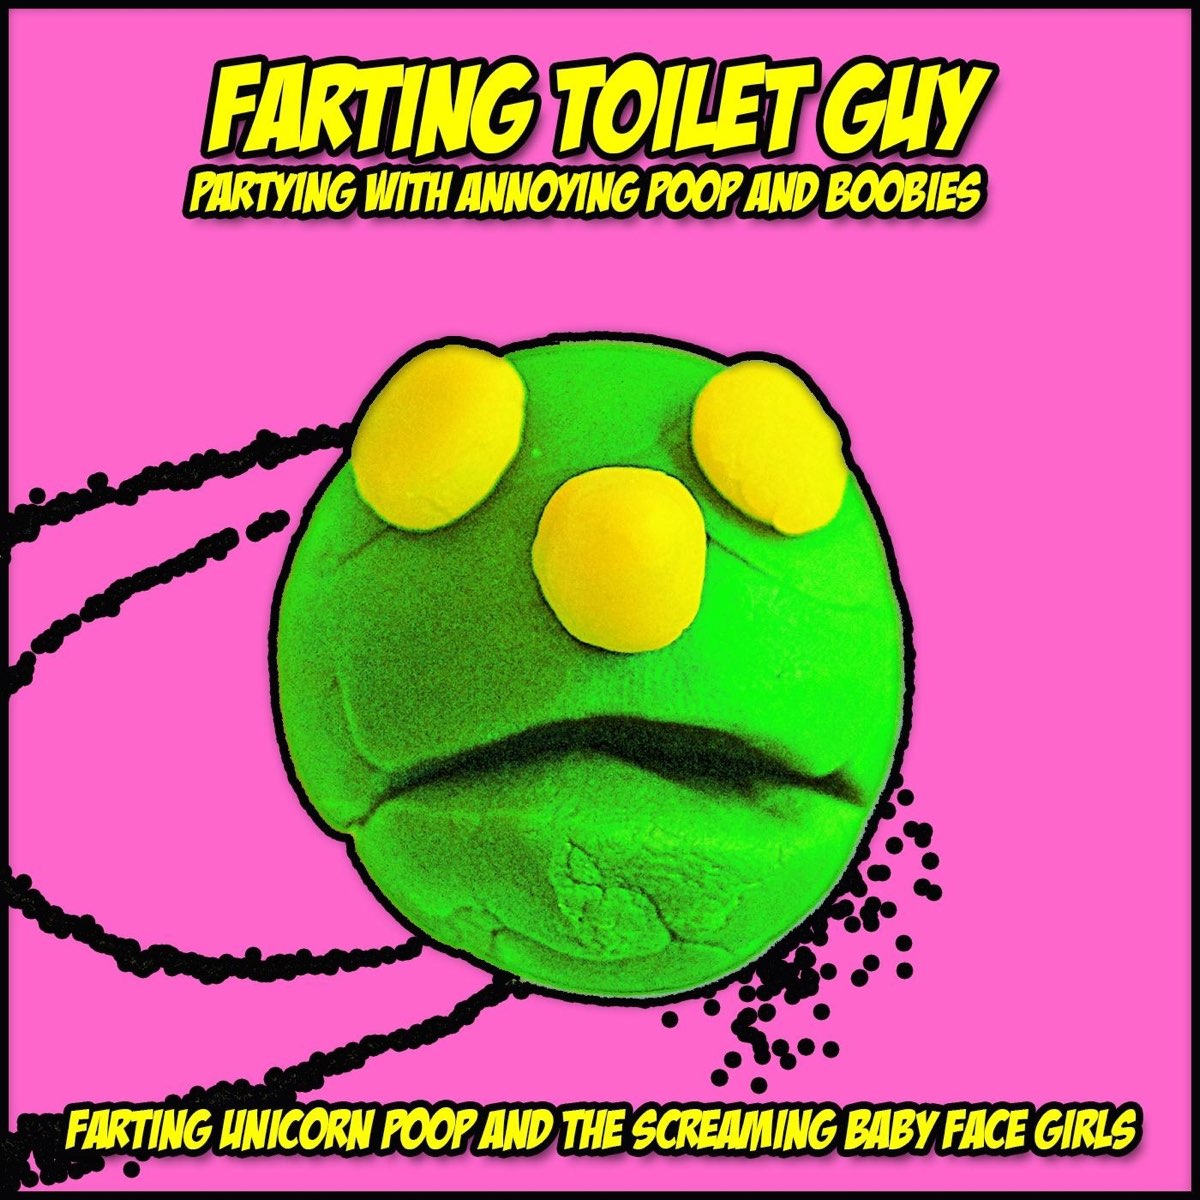 /u200eFarting Unicorn Poop and the Screaming Baby Face Girls - Album by Farting Toilet Guy Partying with Annoying Poop and Boobies